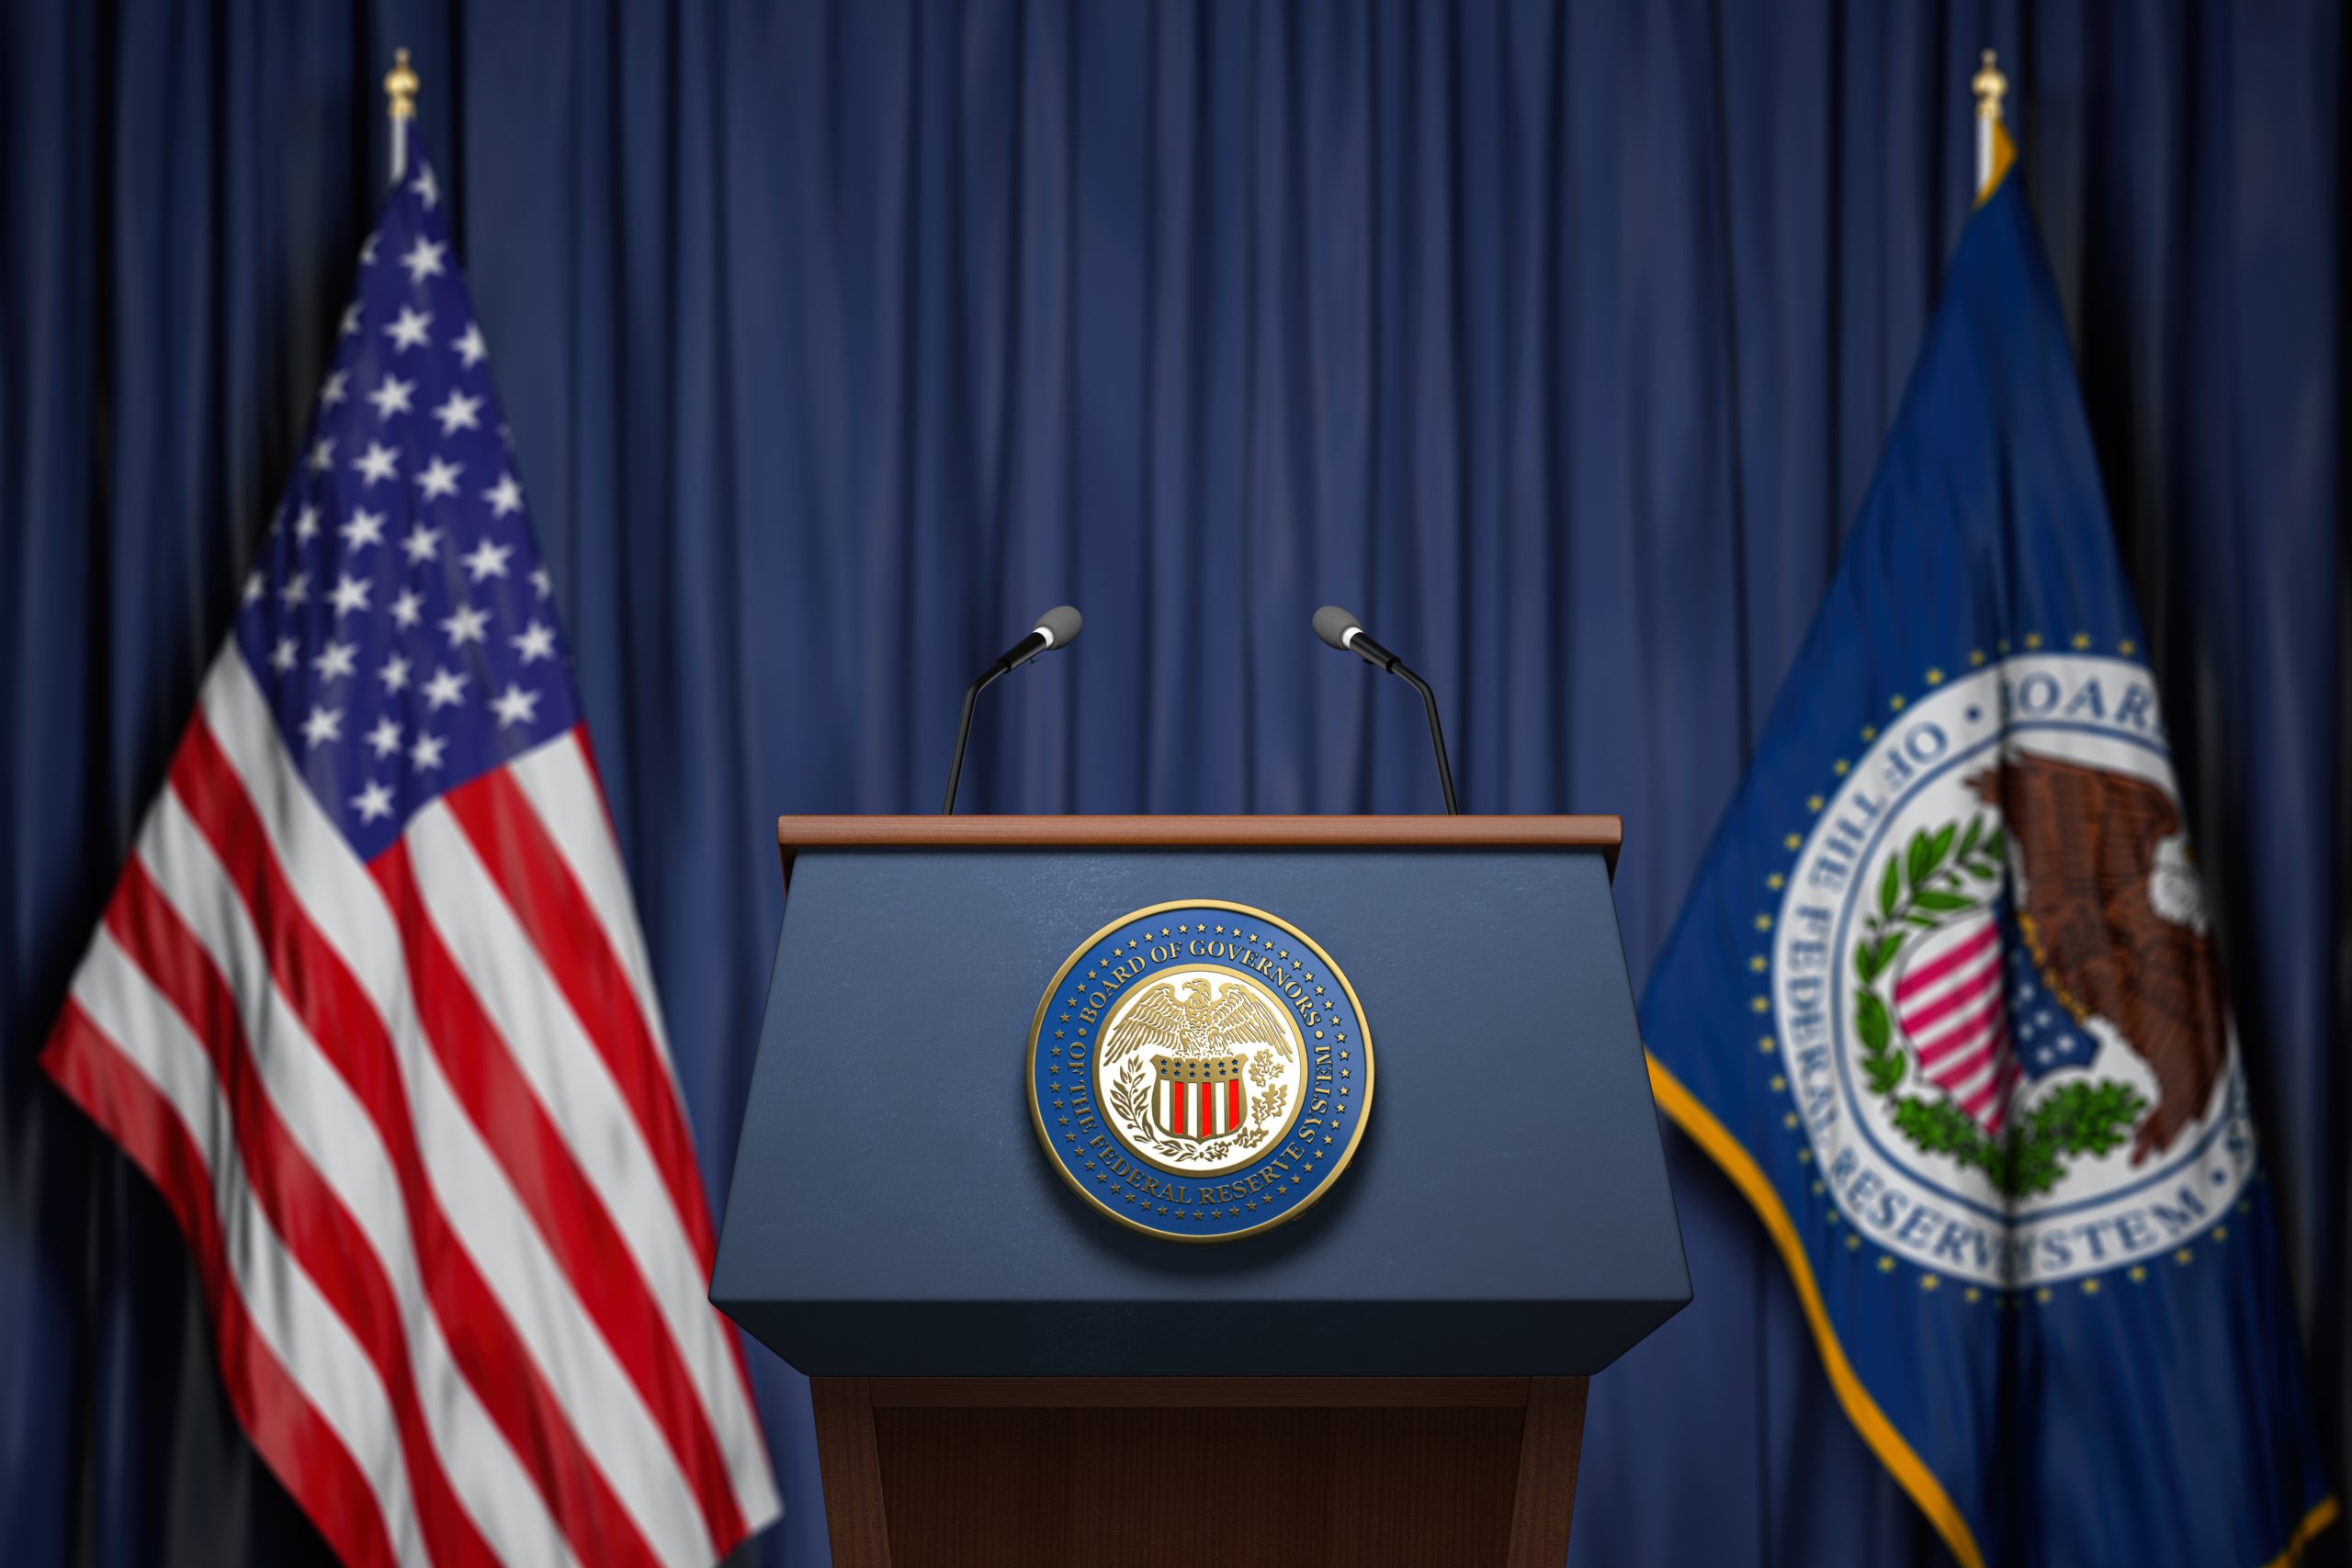 Stock photo of the Federal Reserve press conference stage.